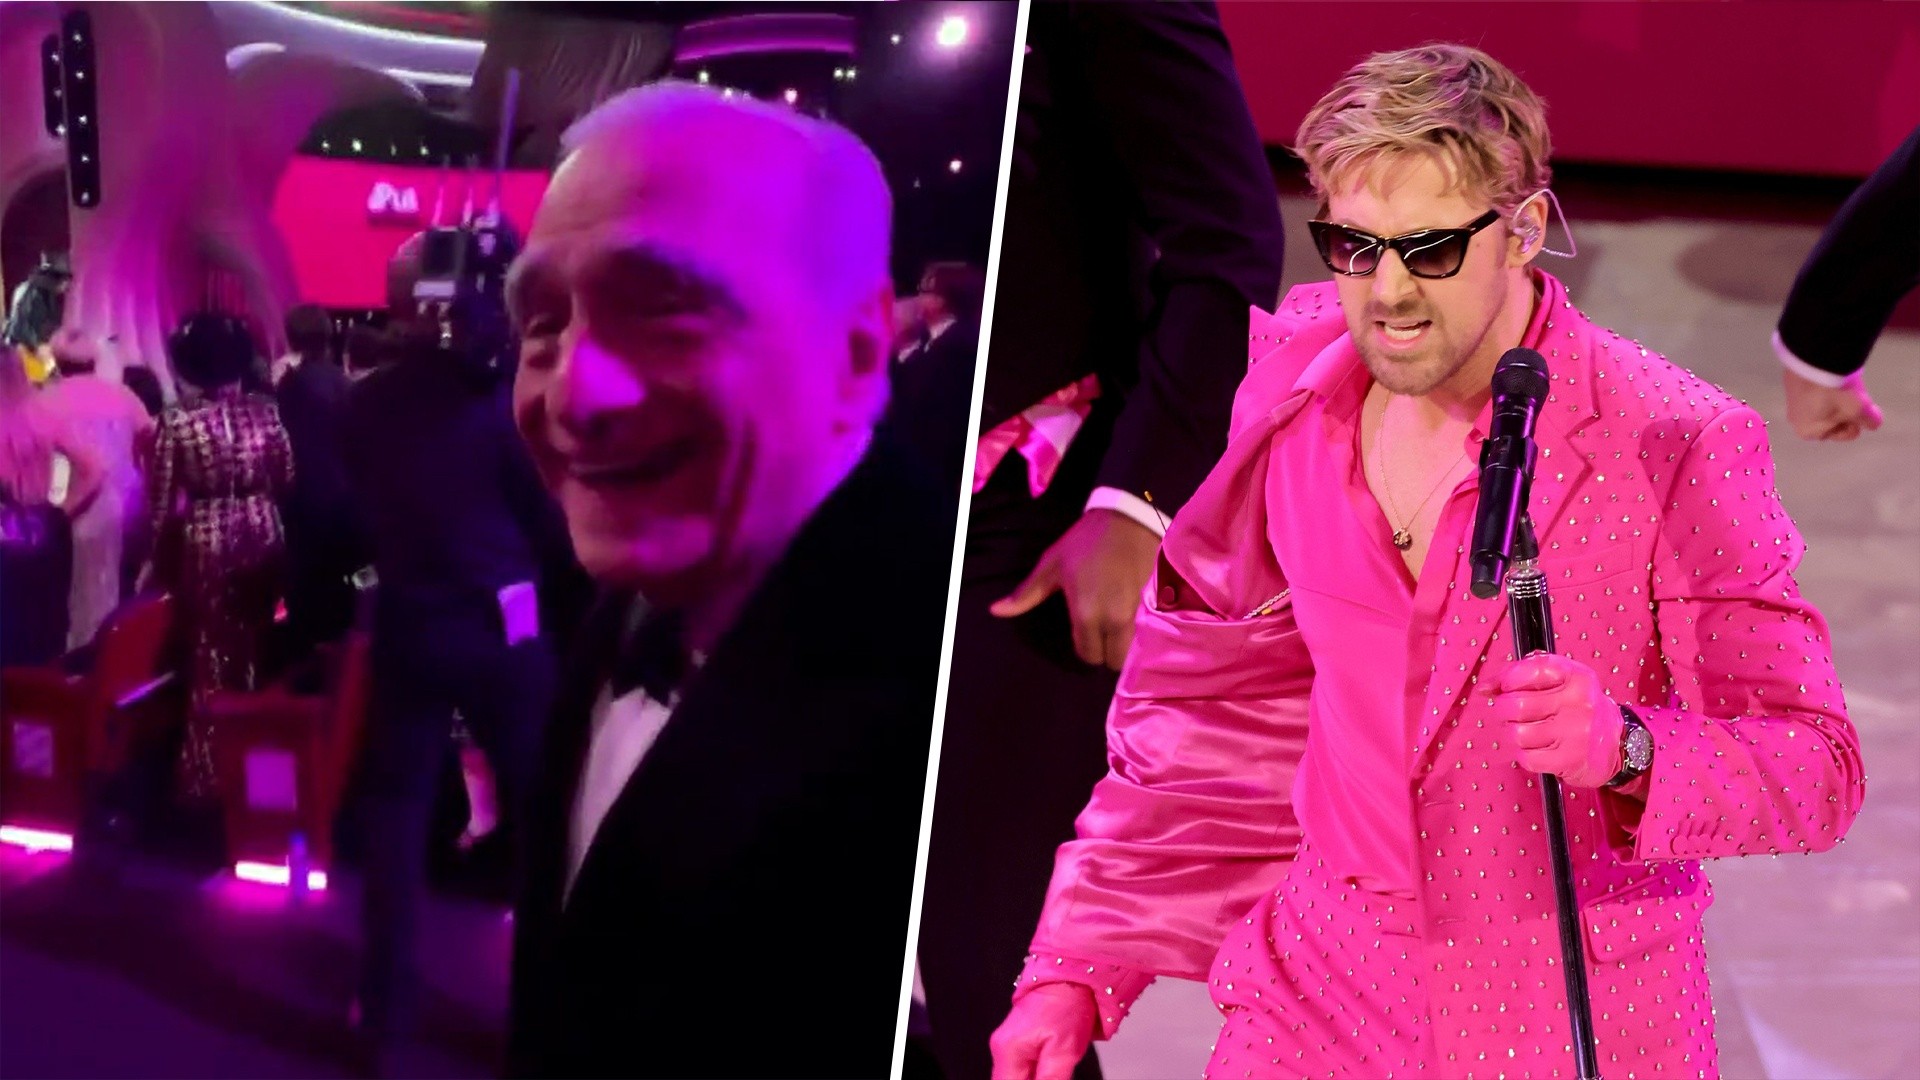 See Martin Scorsese's reaction to 'I'm Just Ken' live at the Oscars